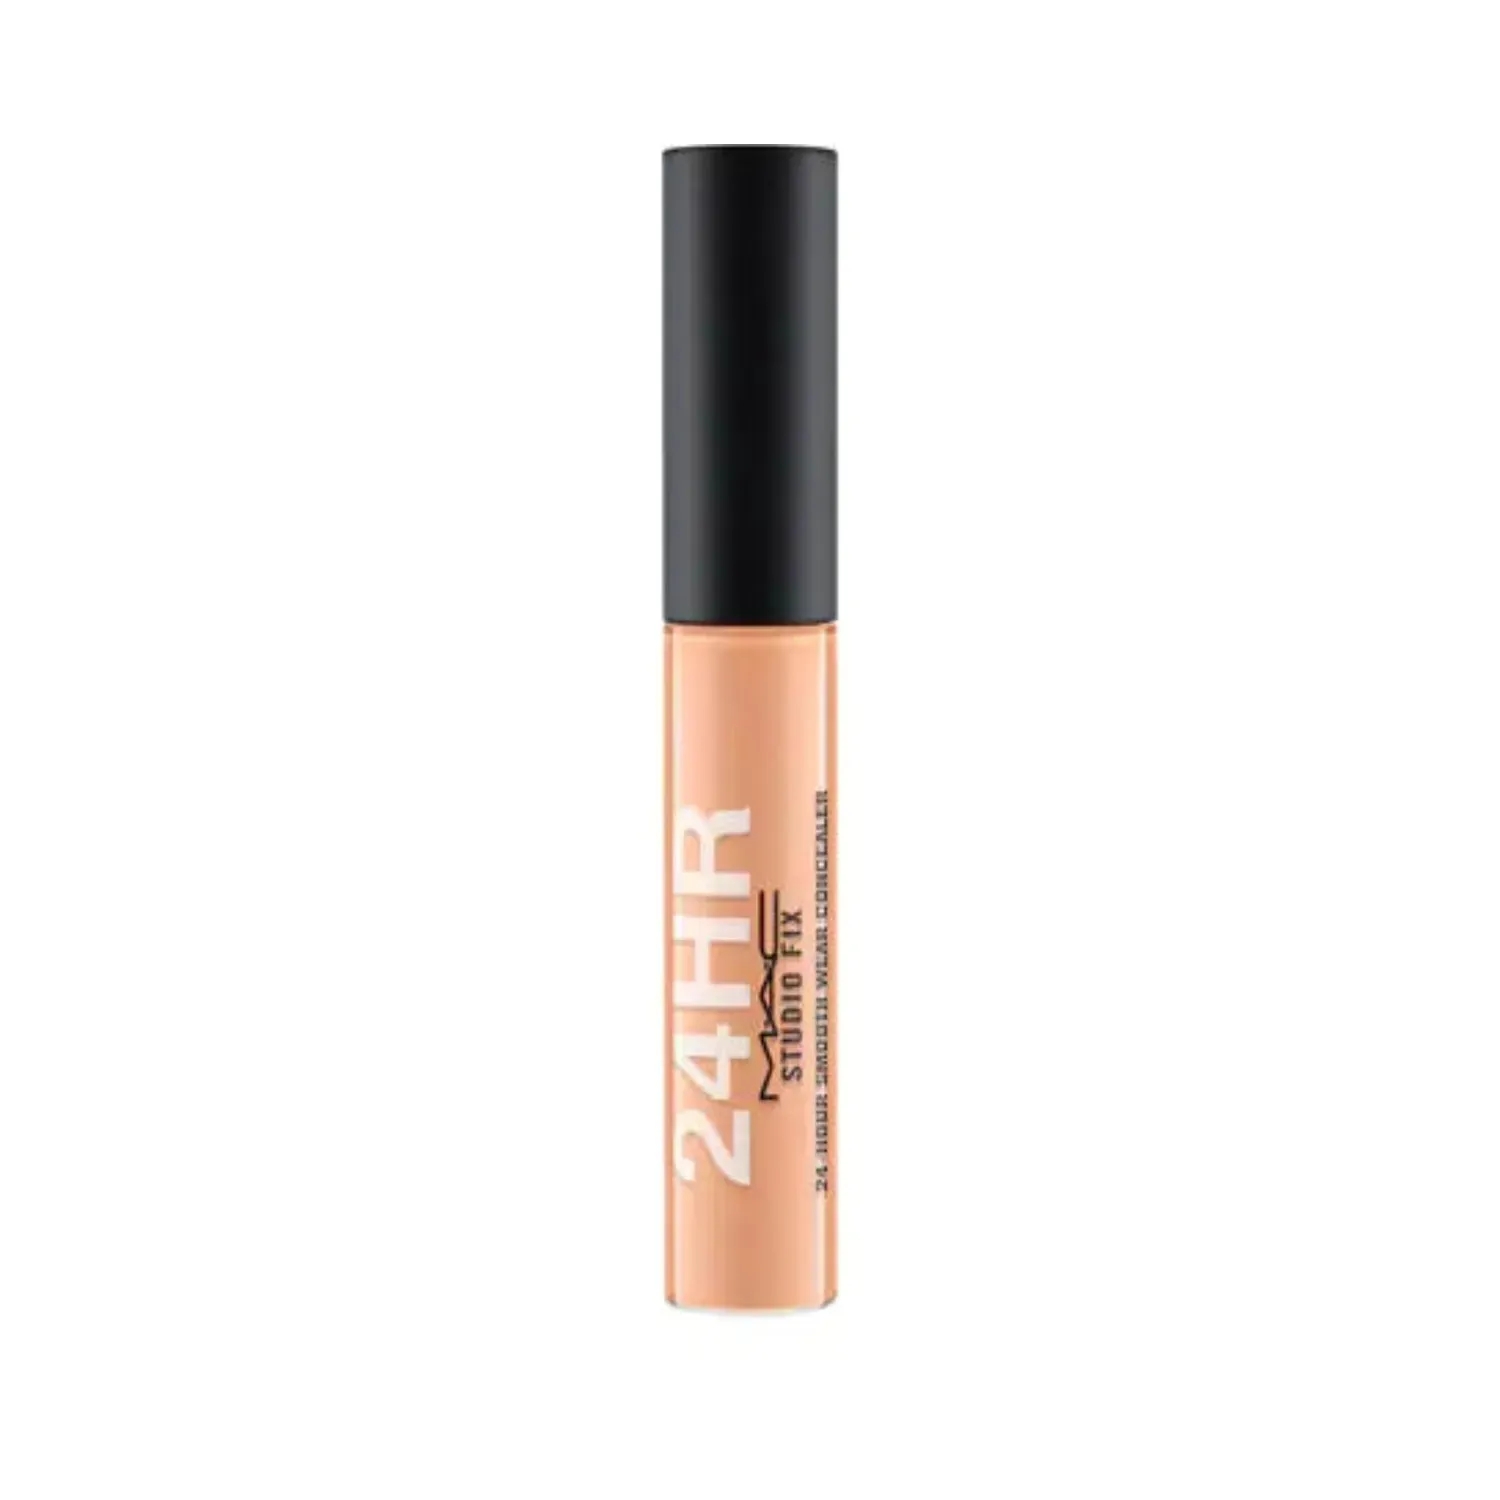 M.A.C | M.A.C Studio Fix 24-Hour Smooth Wear Concealer - NW35 (7ml)